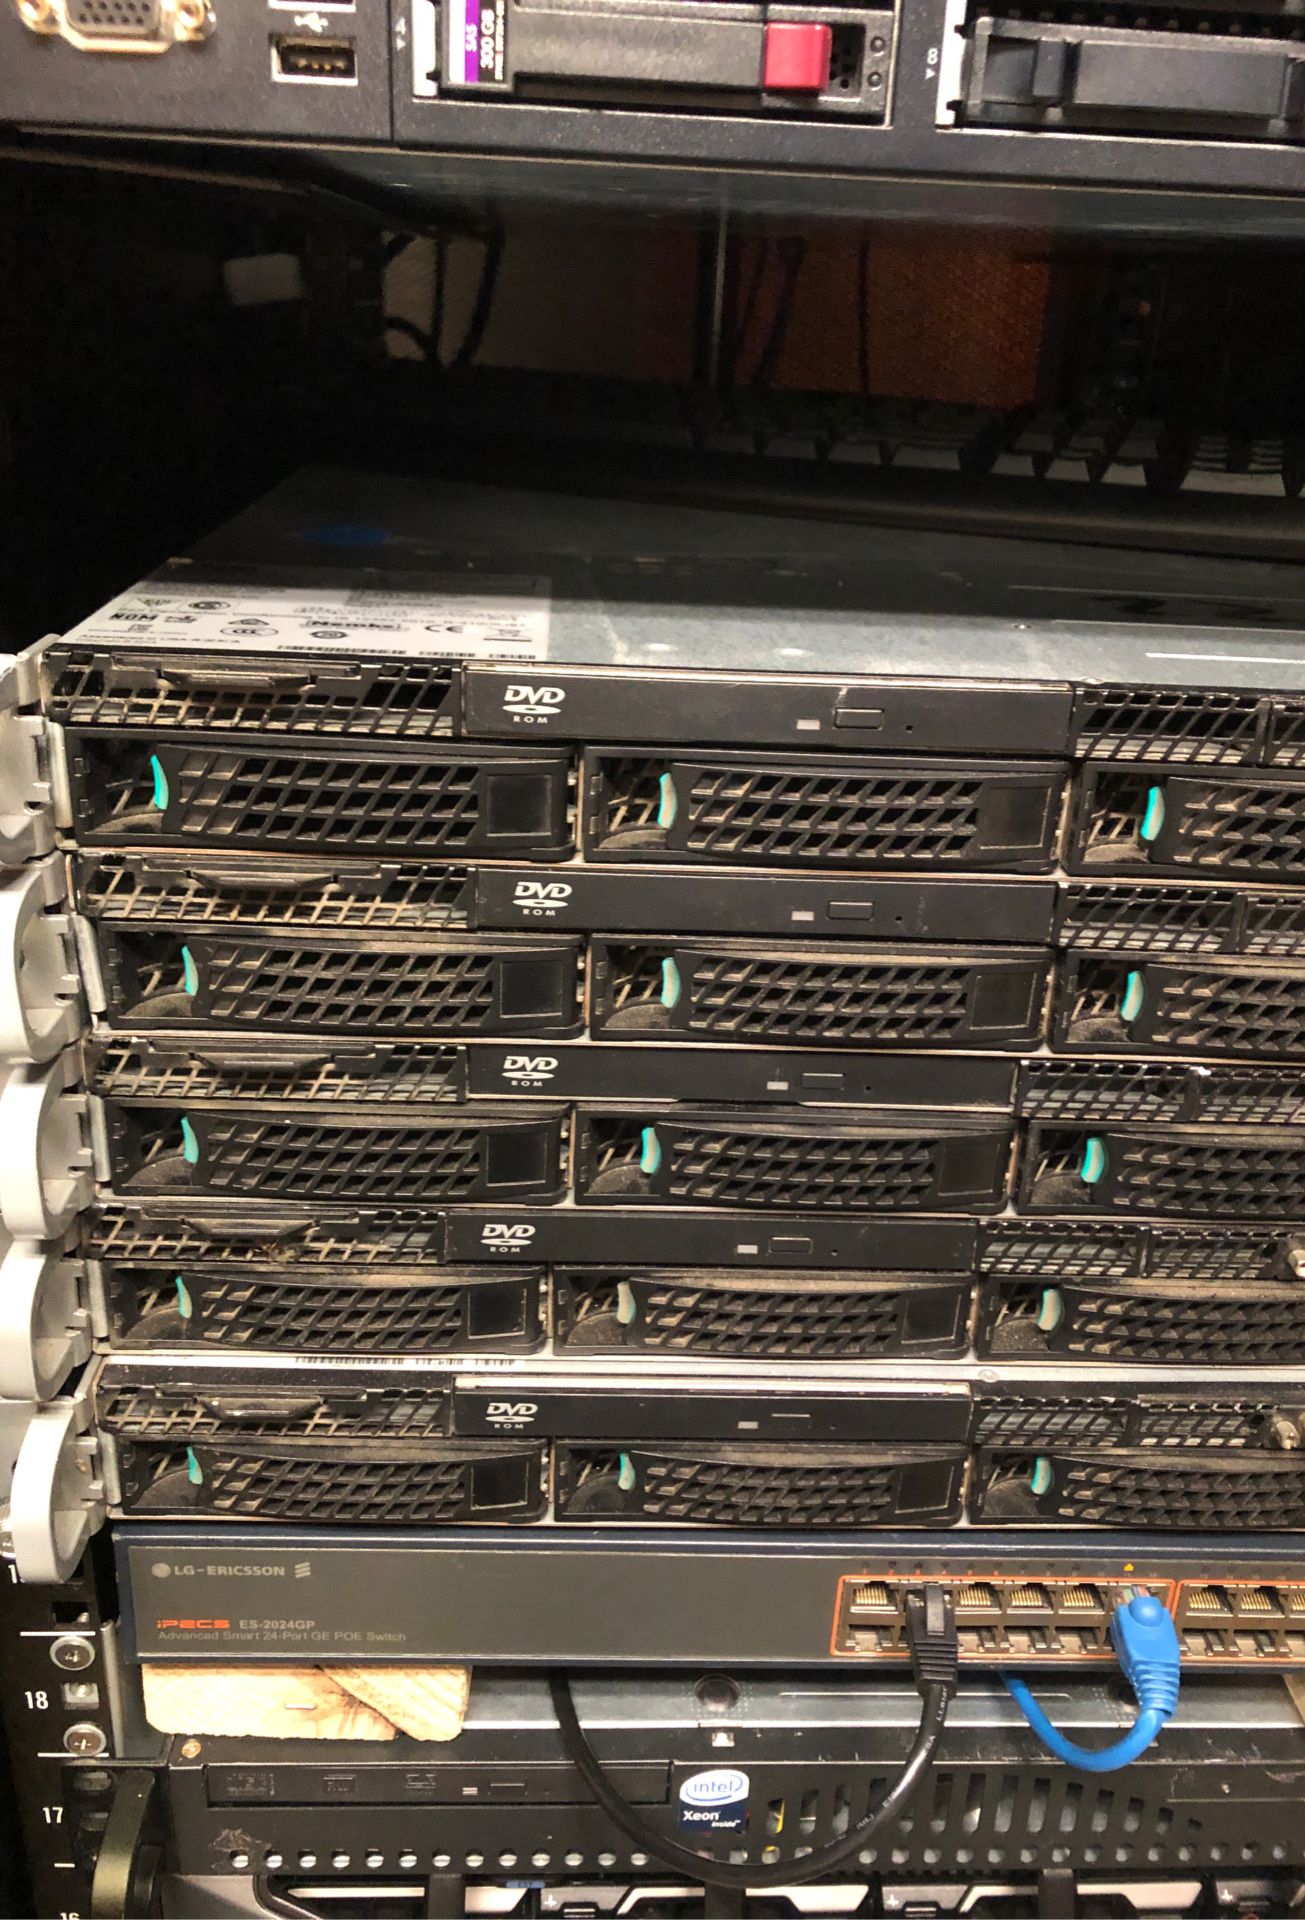 NEI 1800 R3 Servers/workstations/computers